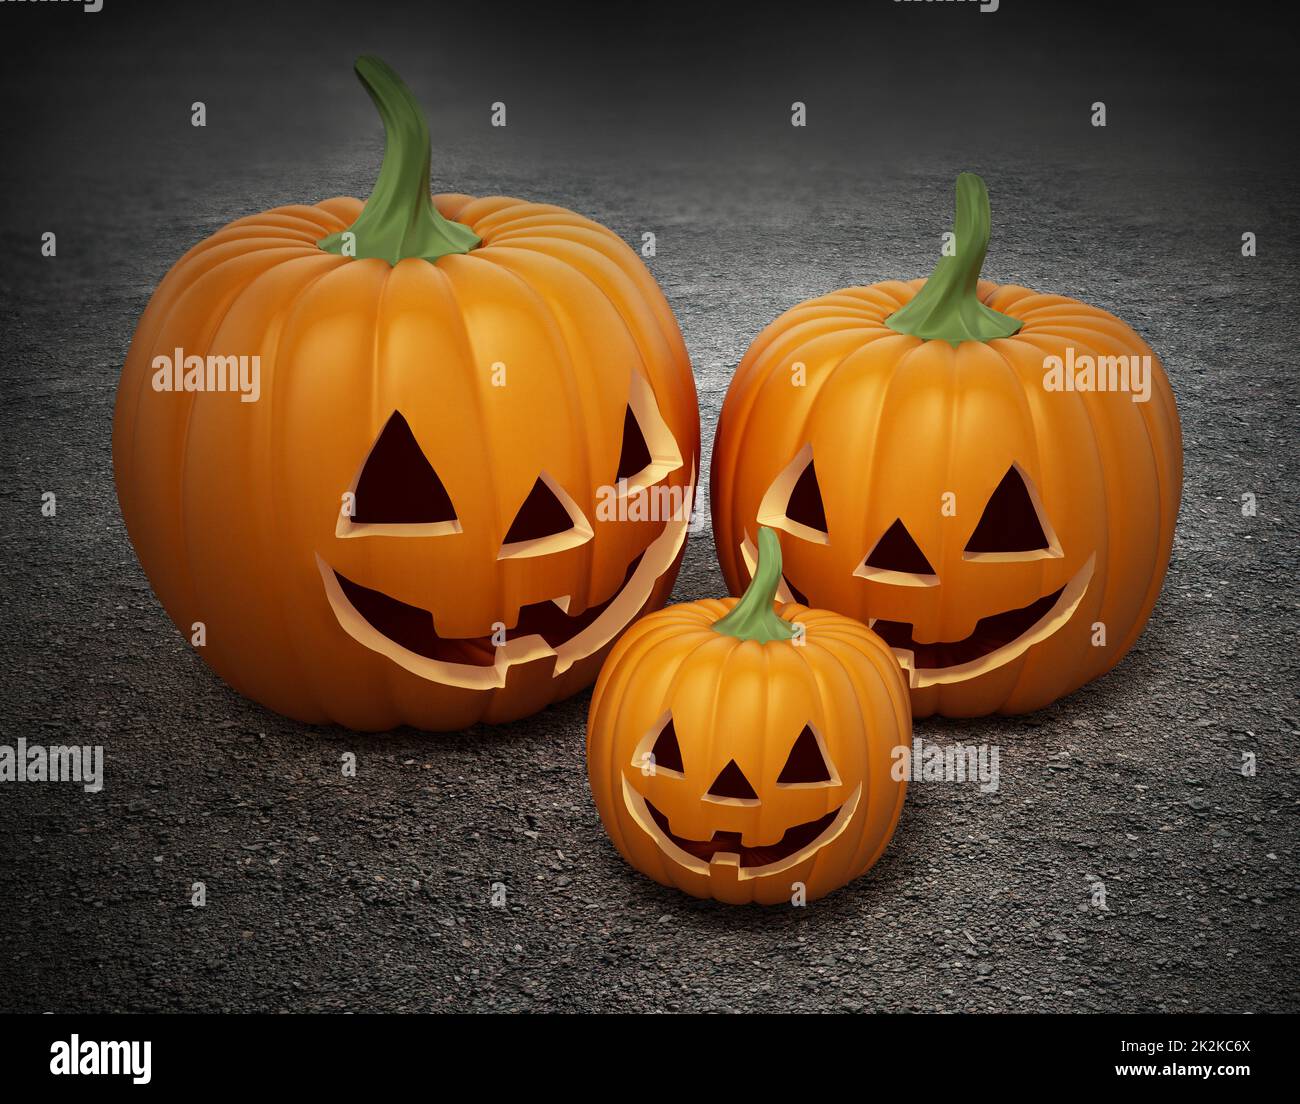 Halloween pumpkins with funny smiling faces. 3D illustration Stock Photo